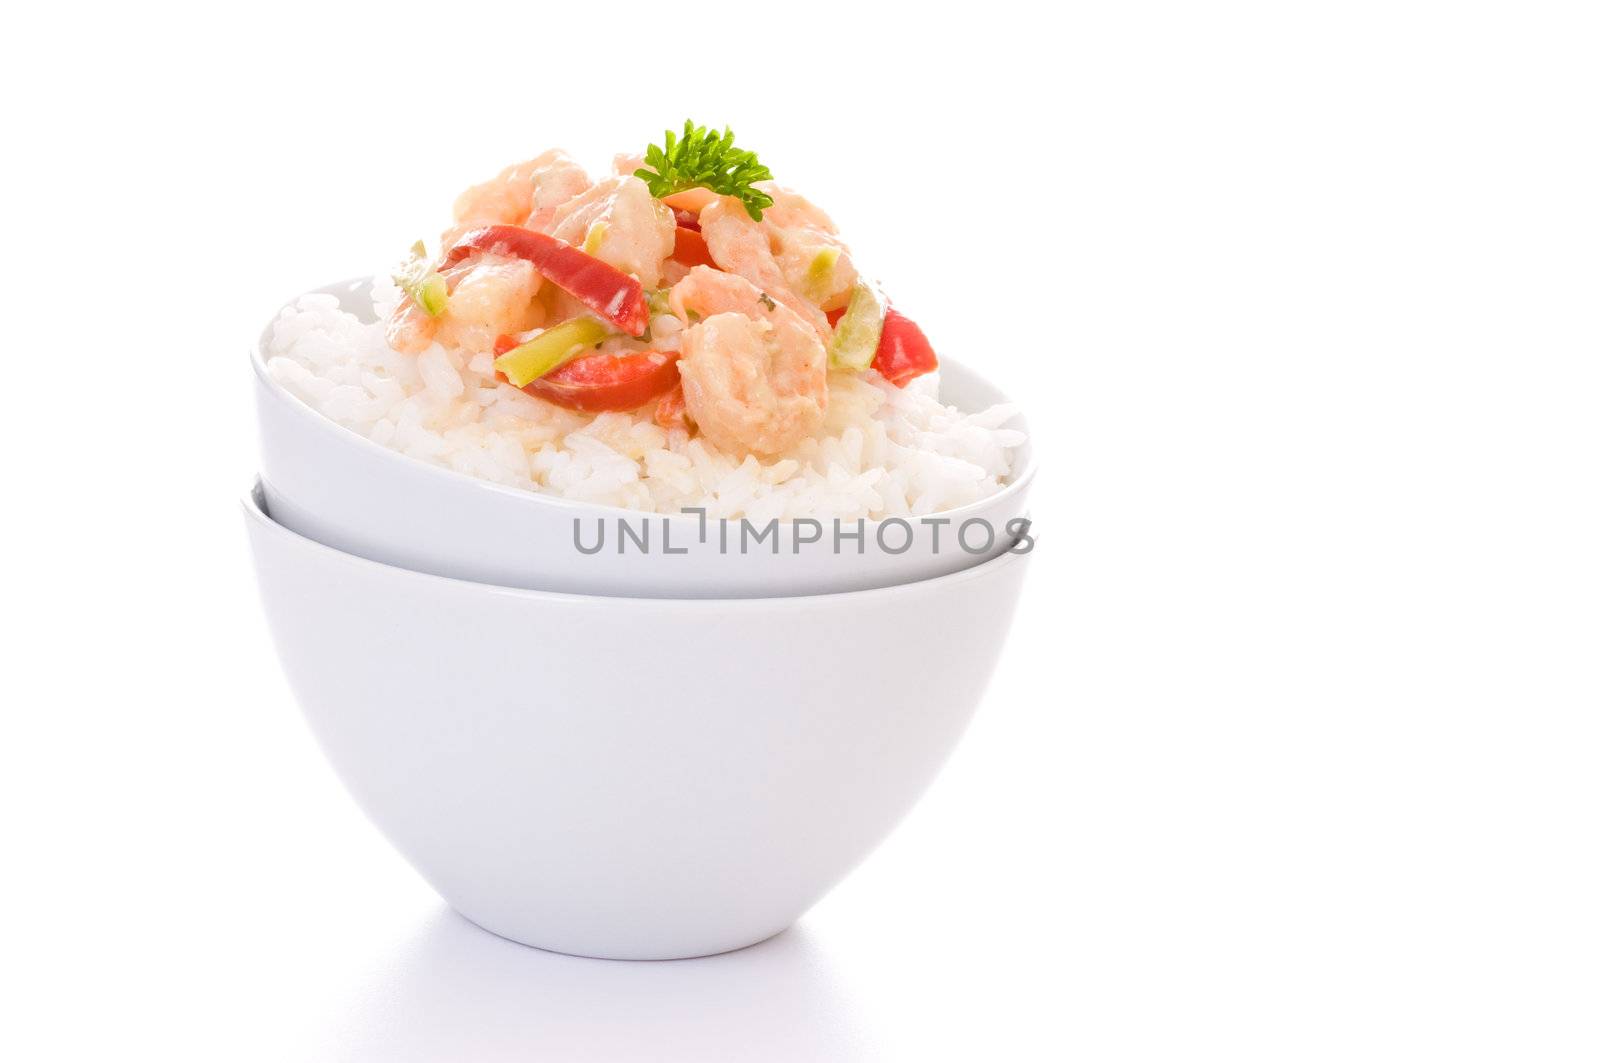 Thai green curry shrimp served with white rice.